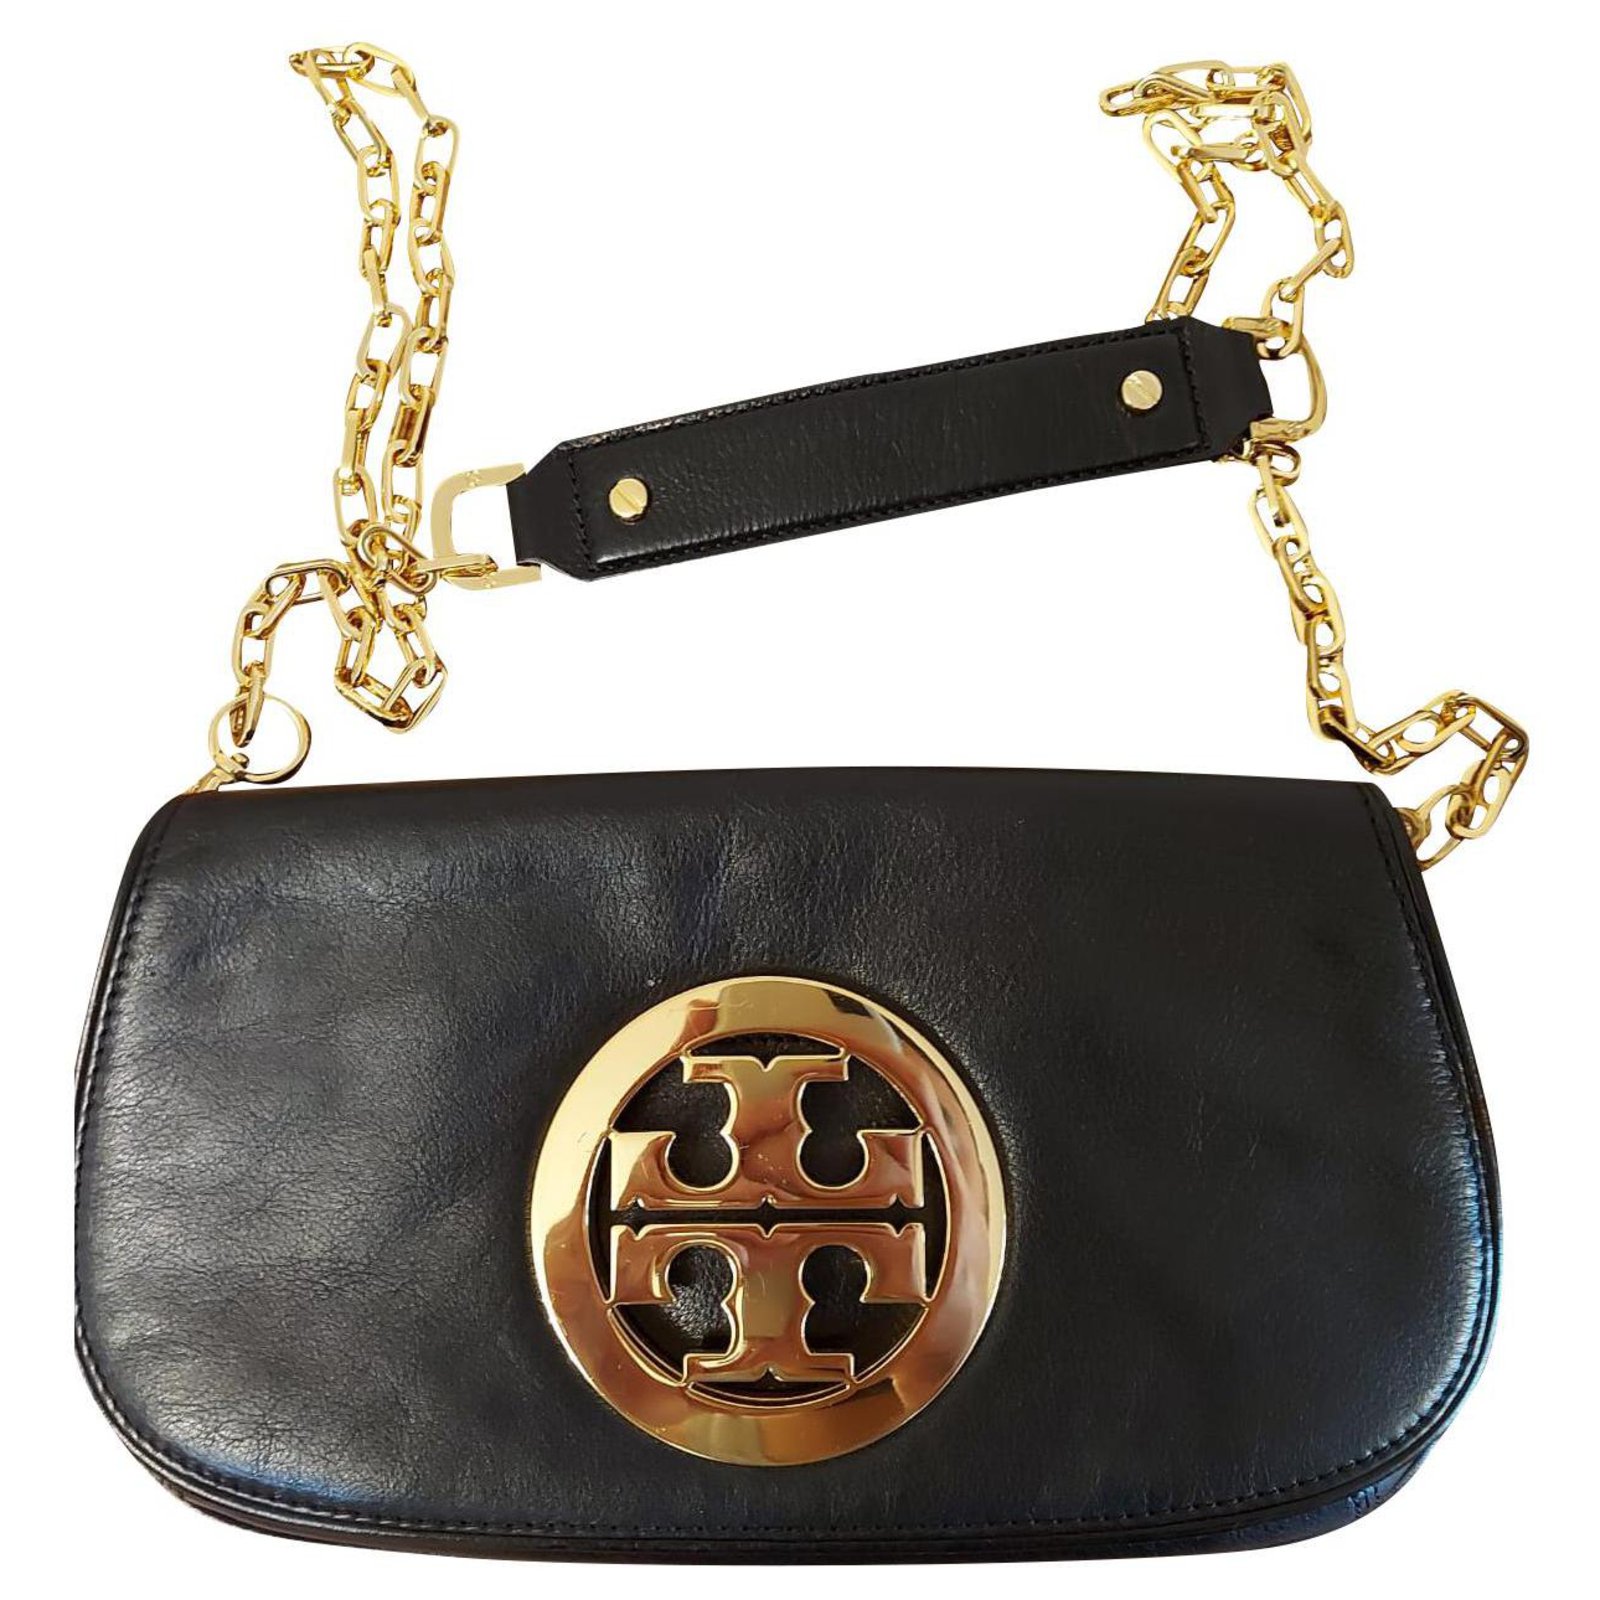 Tory Burch Clutches Online Collection, Save 65% 